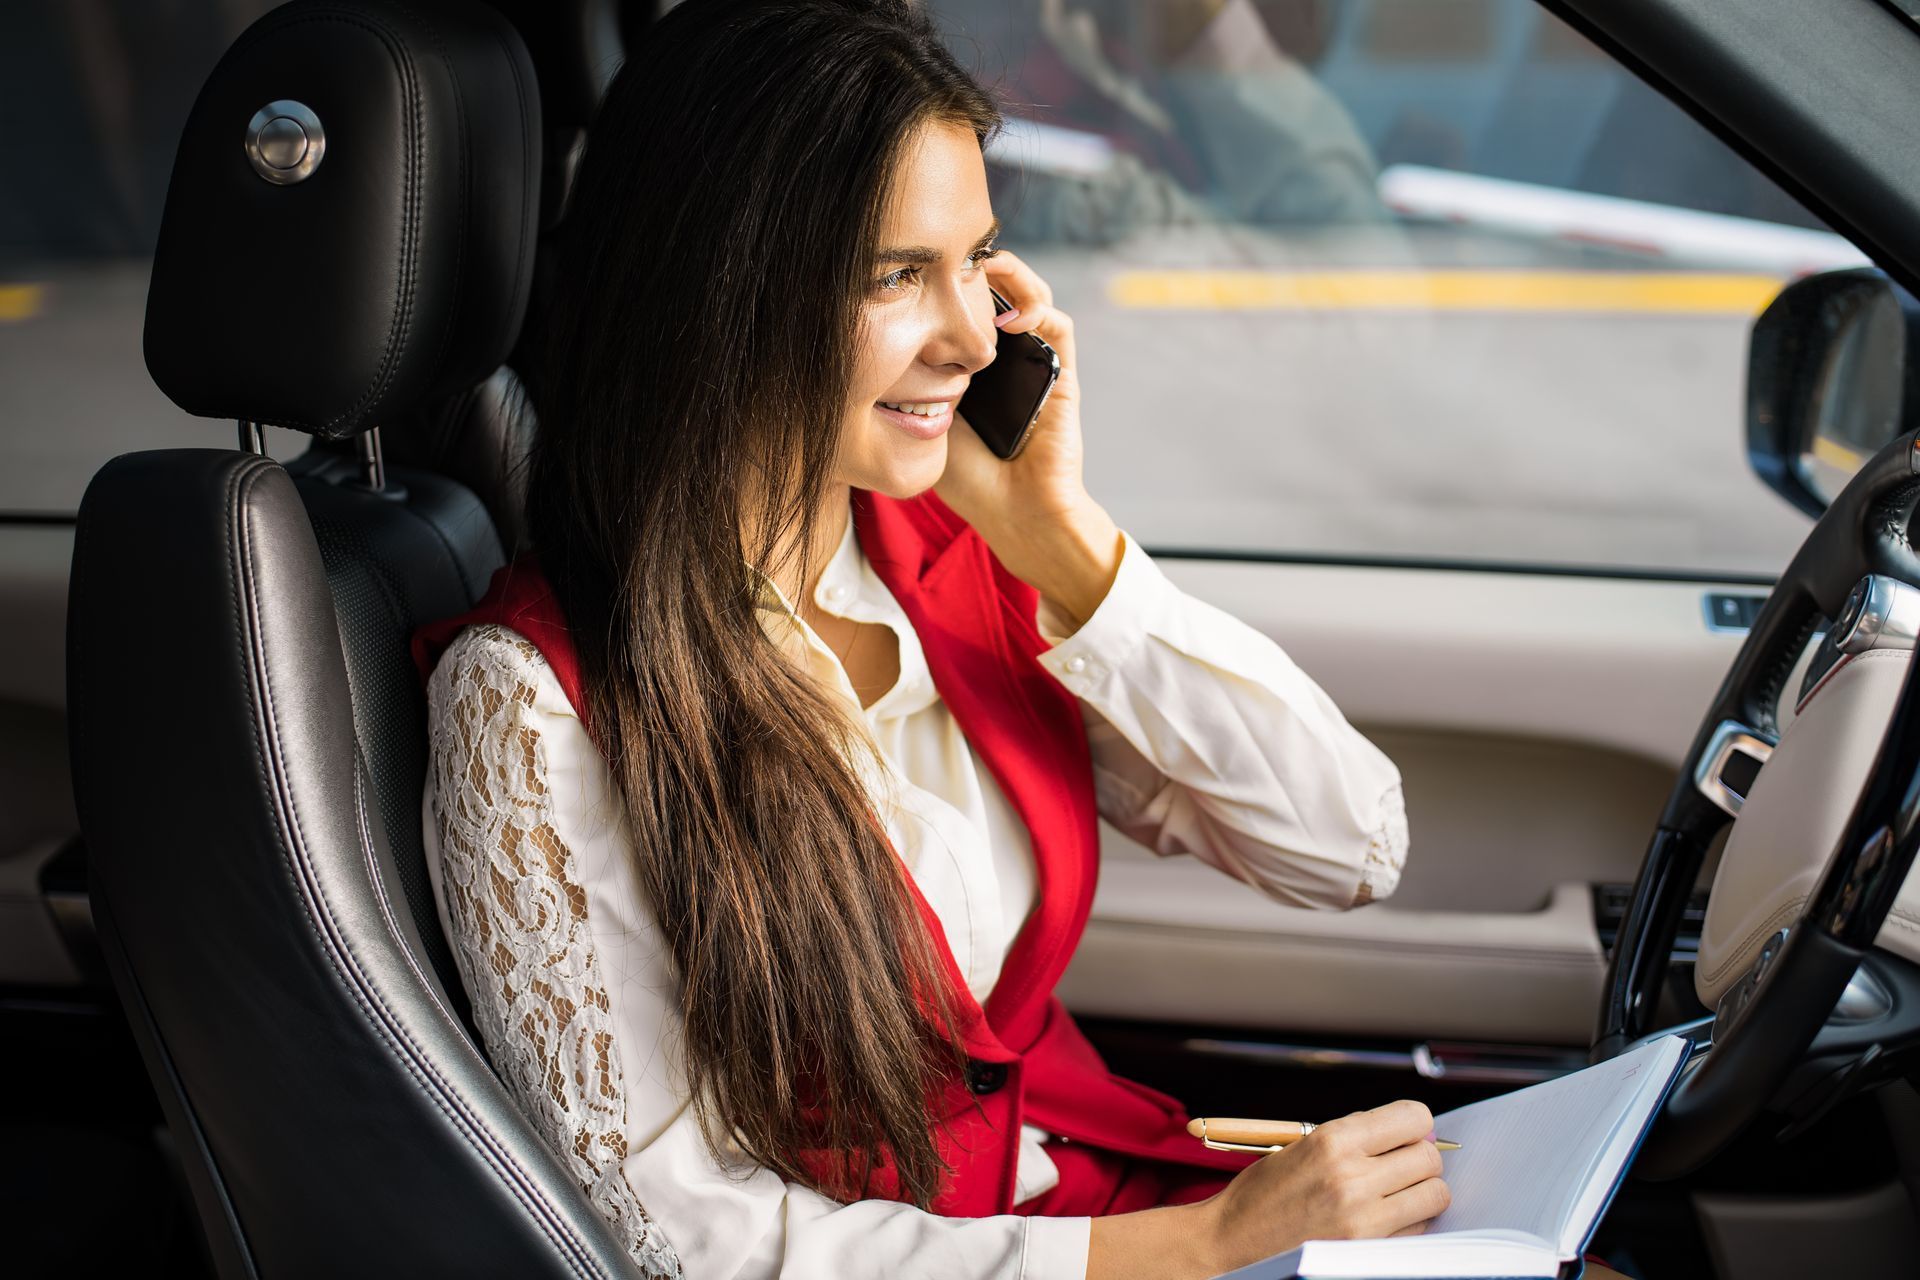 A woman is sitting in the driver's seat of a car talking on a cell phone making an appointment.